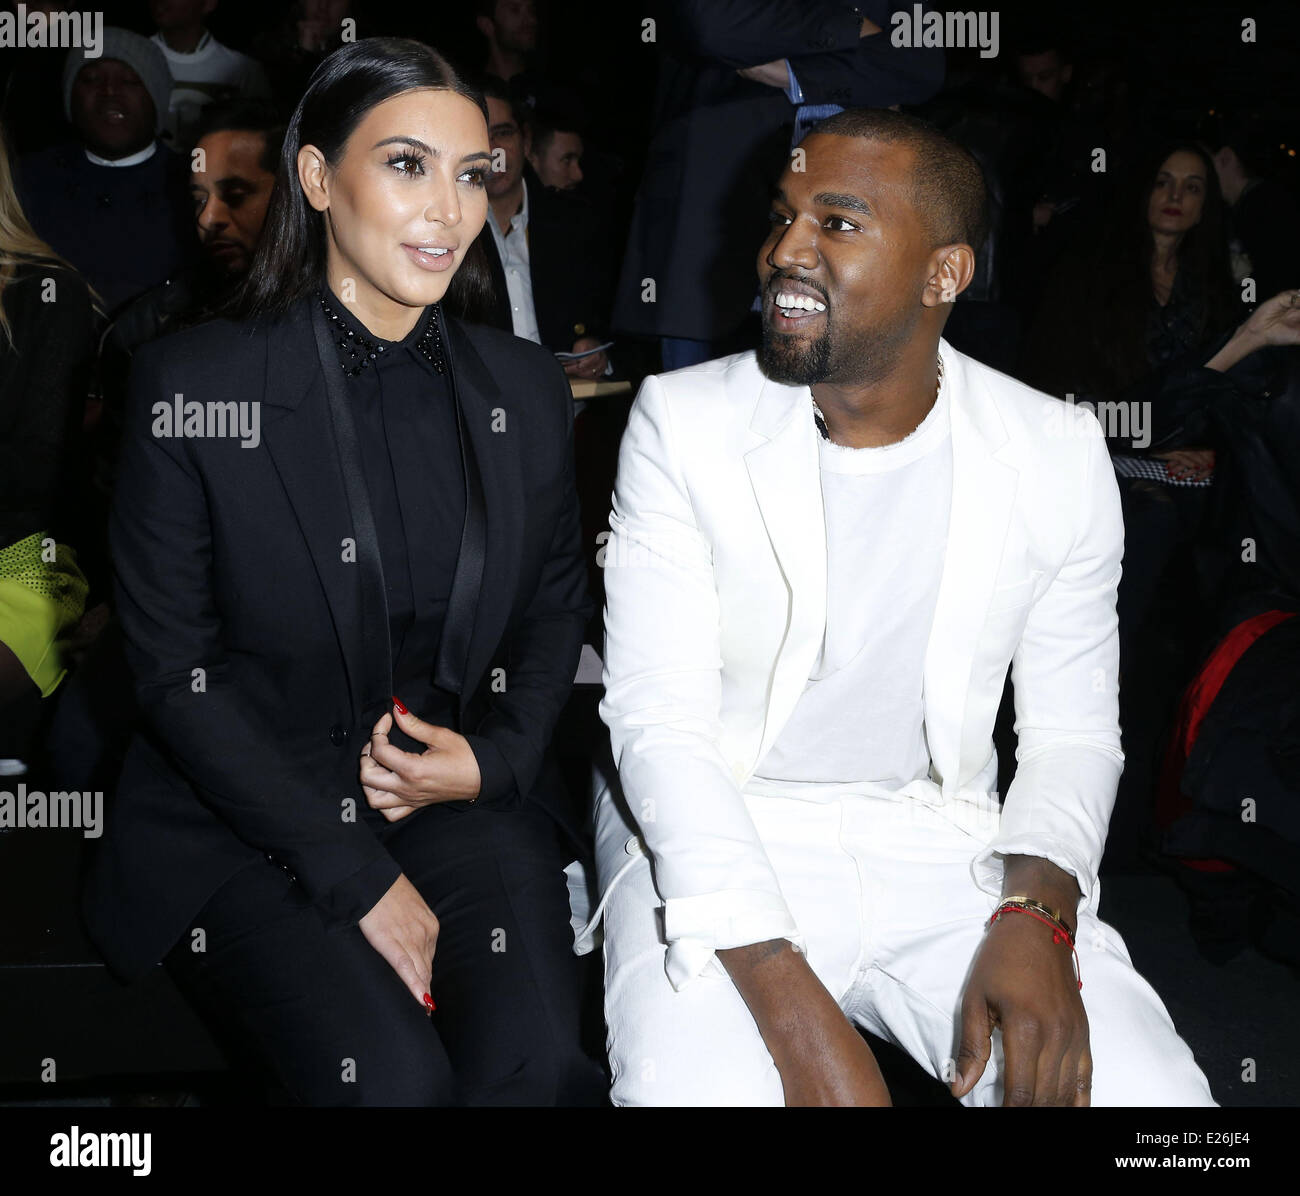 KIM KARDASHIAN GIVES BIRTH - REPORTS Reality TV star KIM KARDASHIAN and rapper KANYE WEST are celebrating the birth of their first child, according to reports.   The Keeping Up With The Kardashians beauty delivered a daughter at Cedars-Sinai Medical Cent Stock Photo